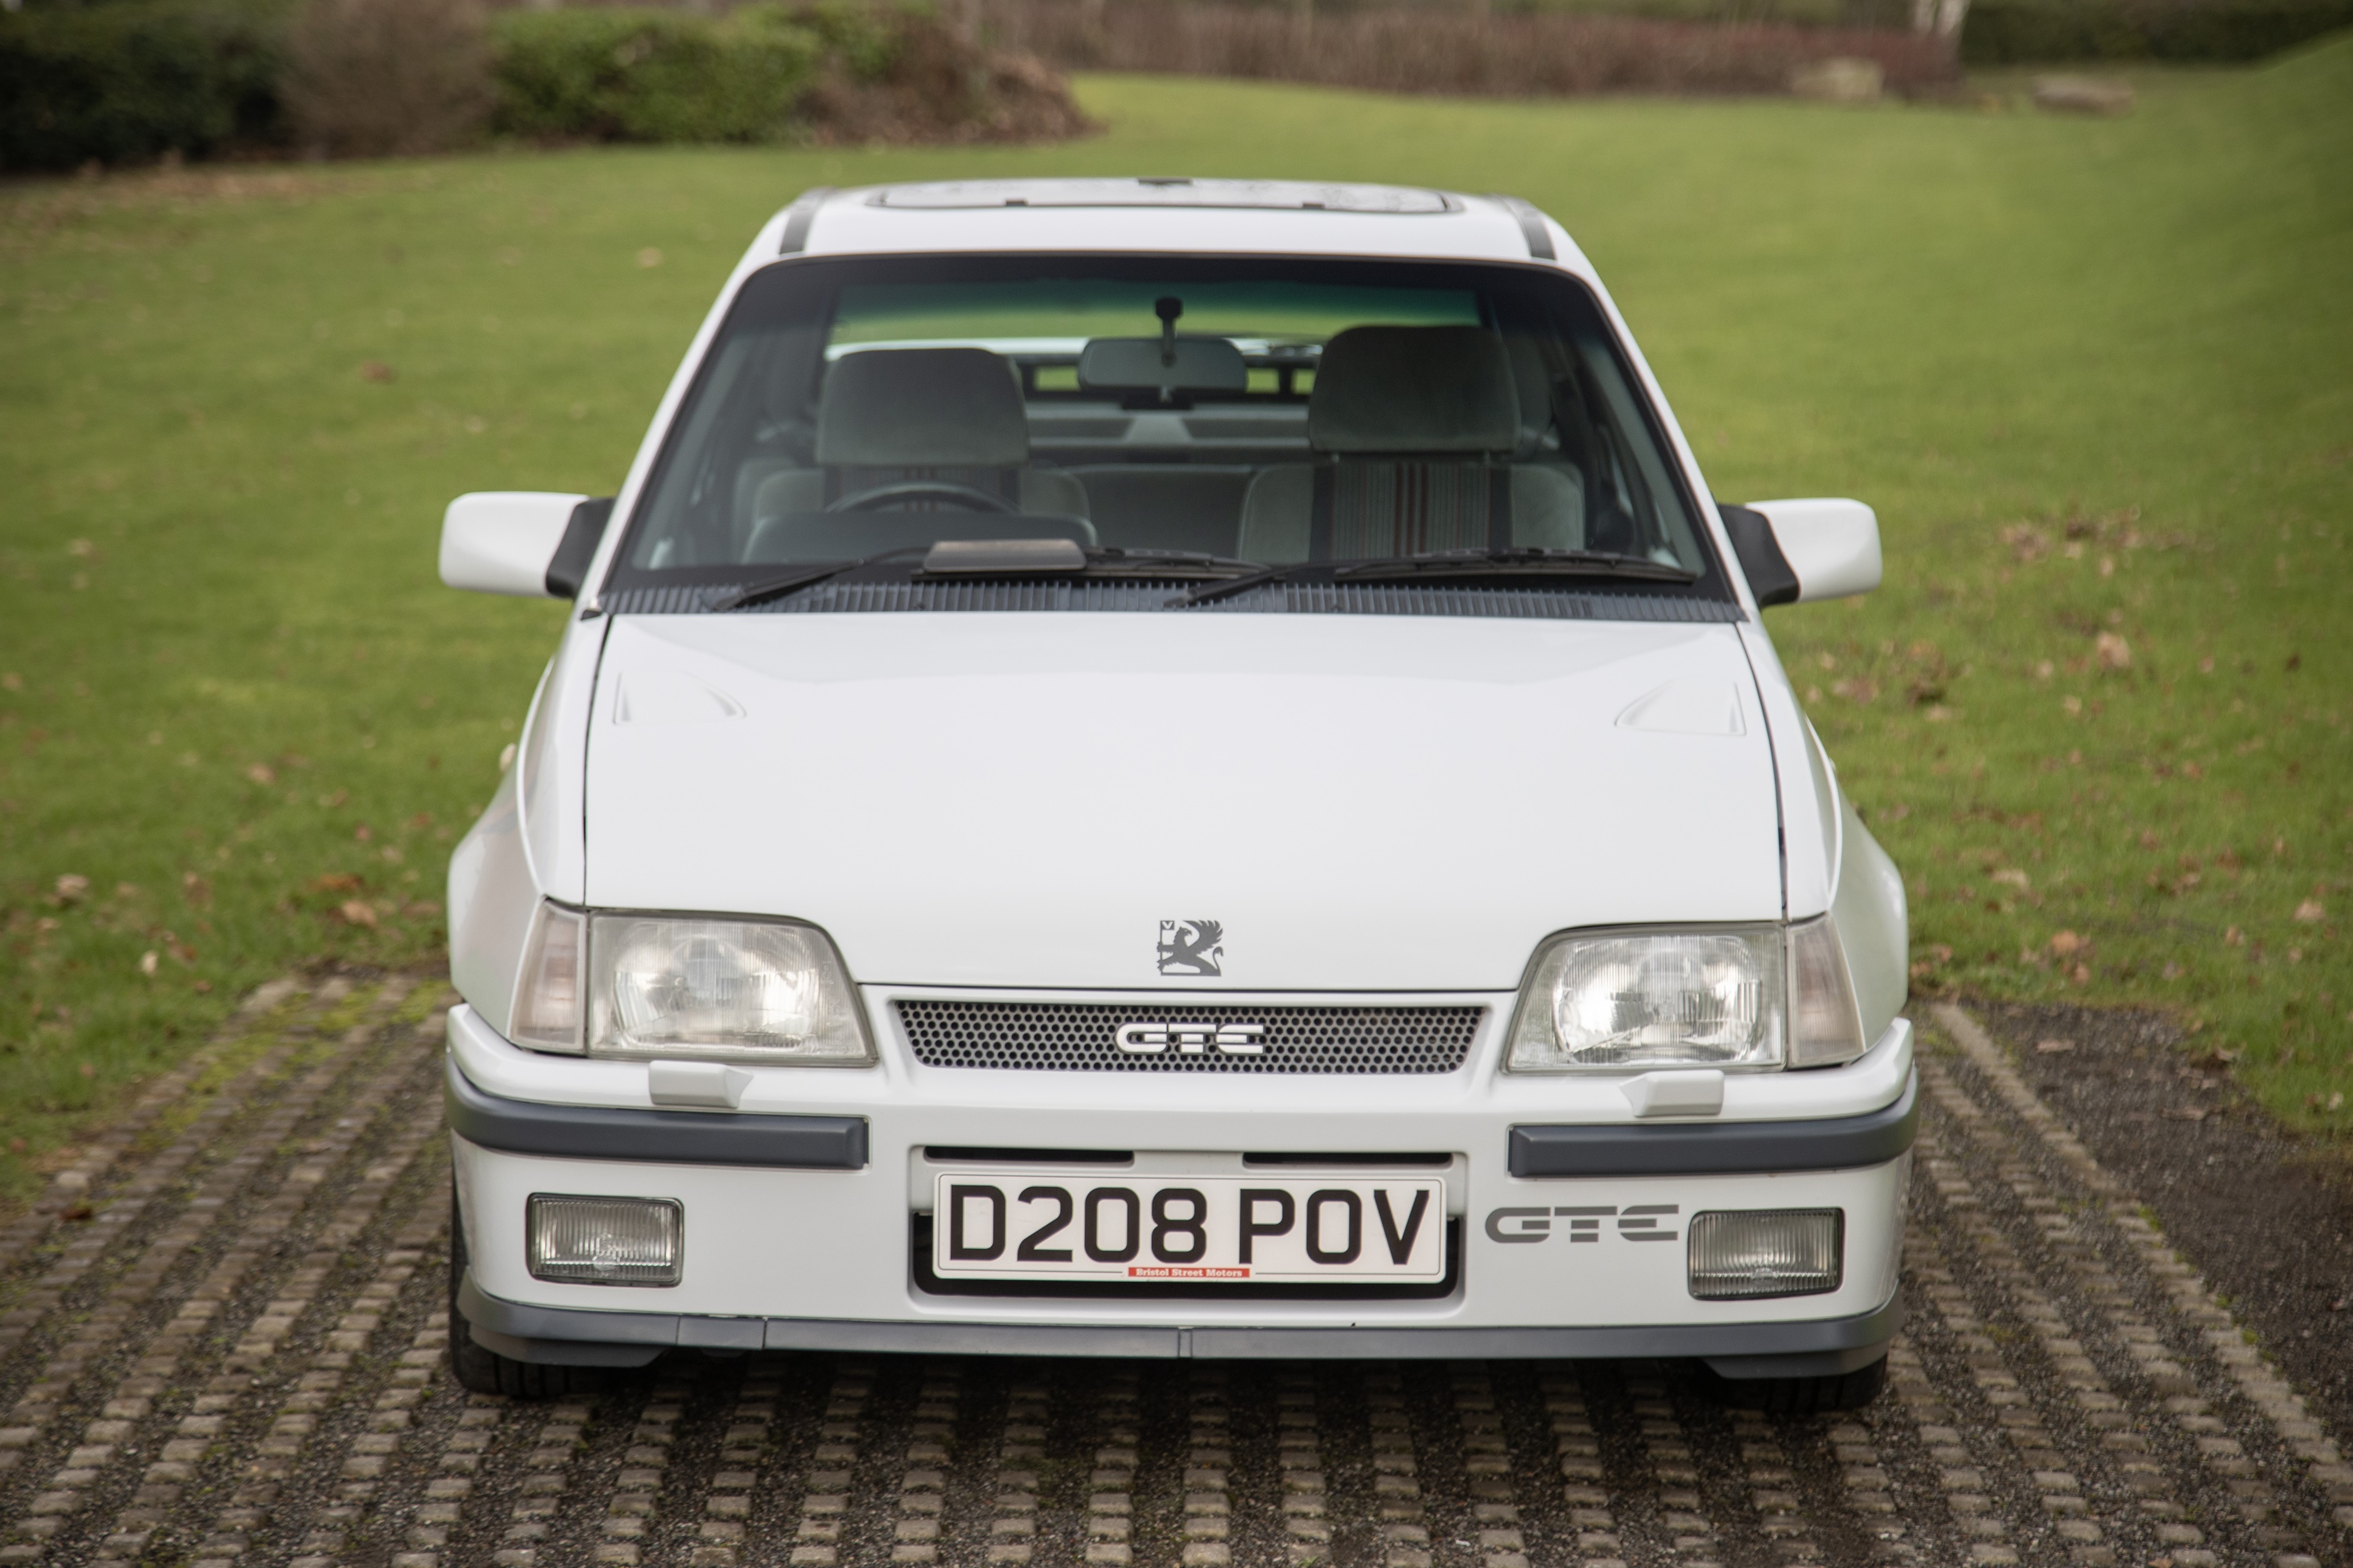 Lot 93 - 1987 Vauxhall Astra GTE